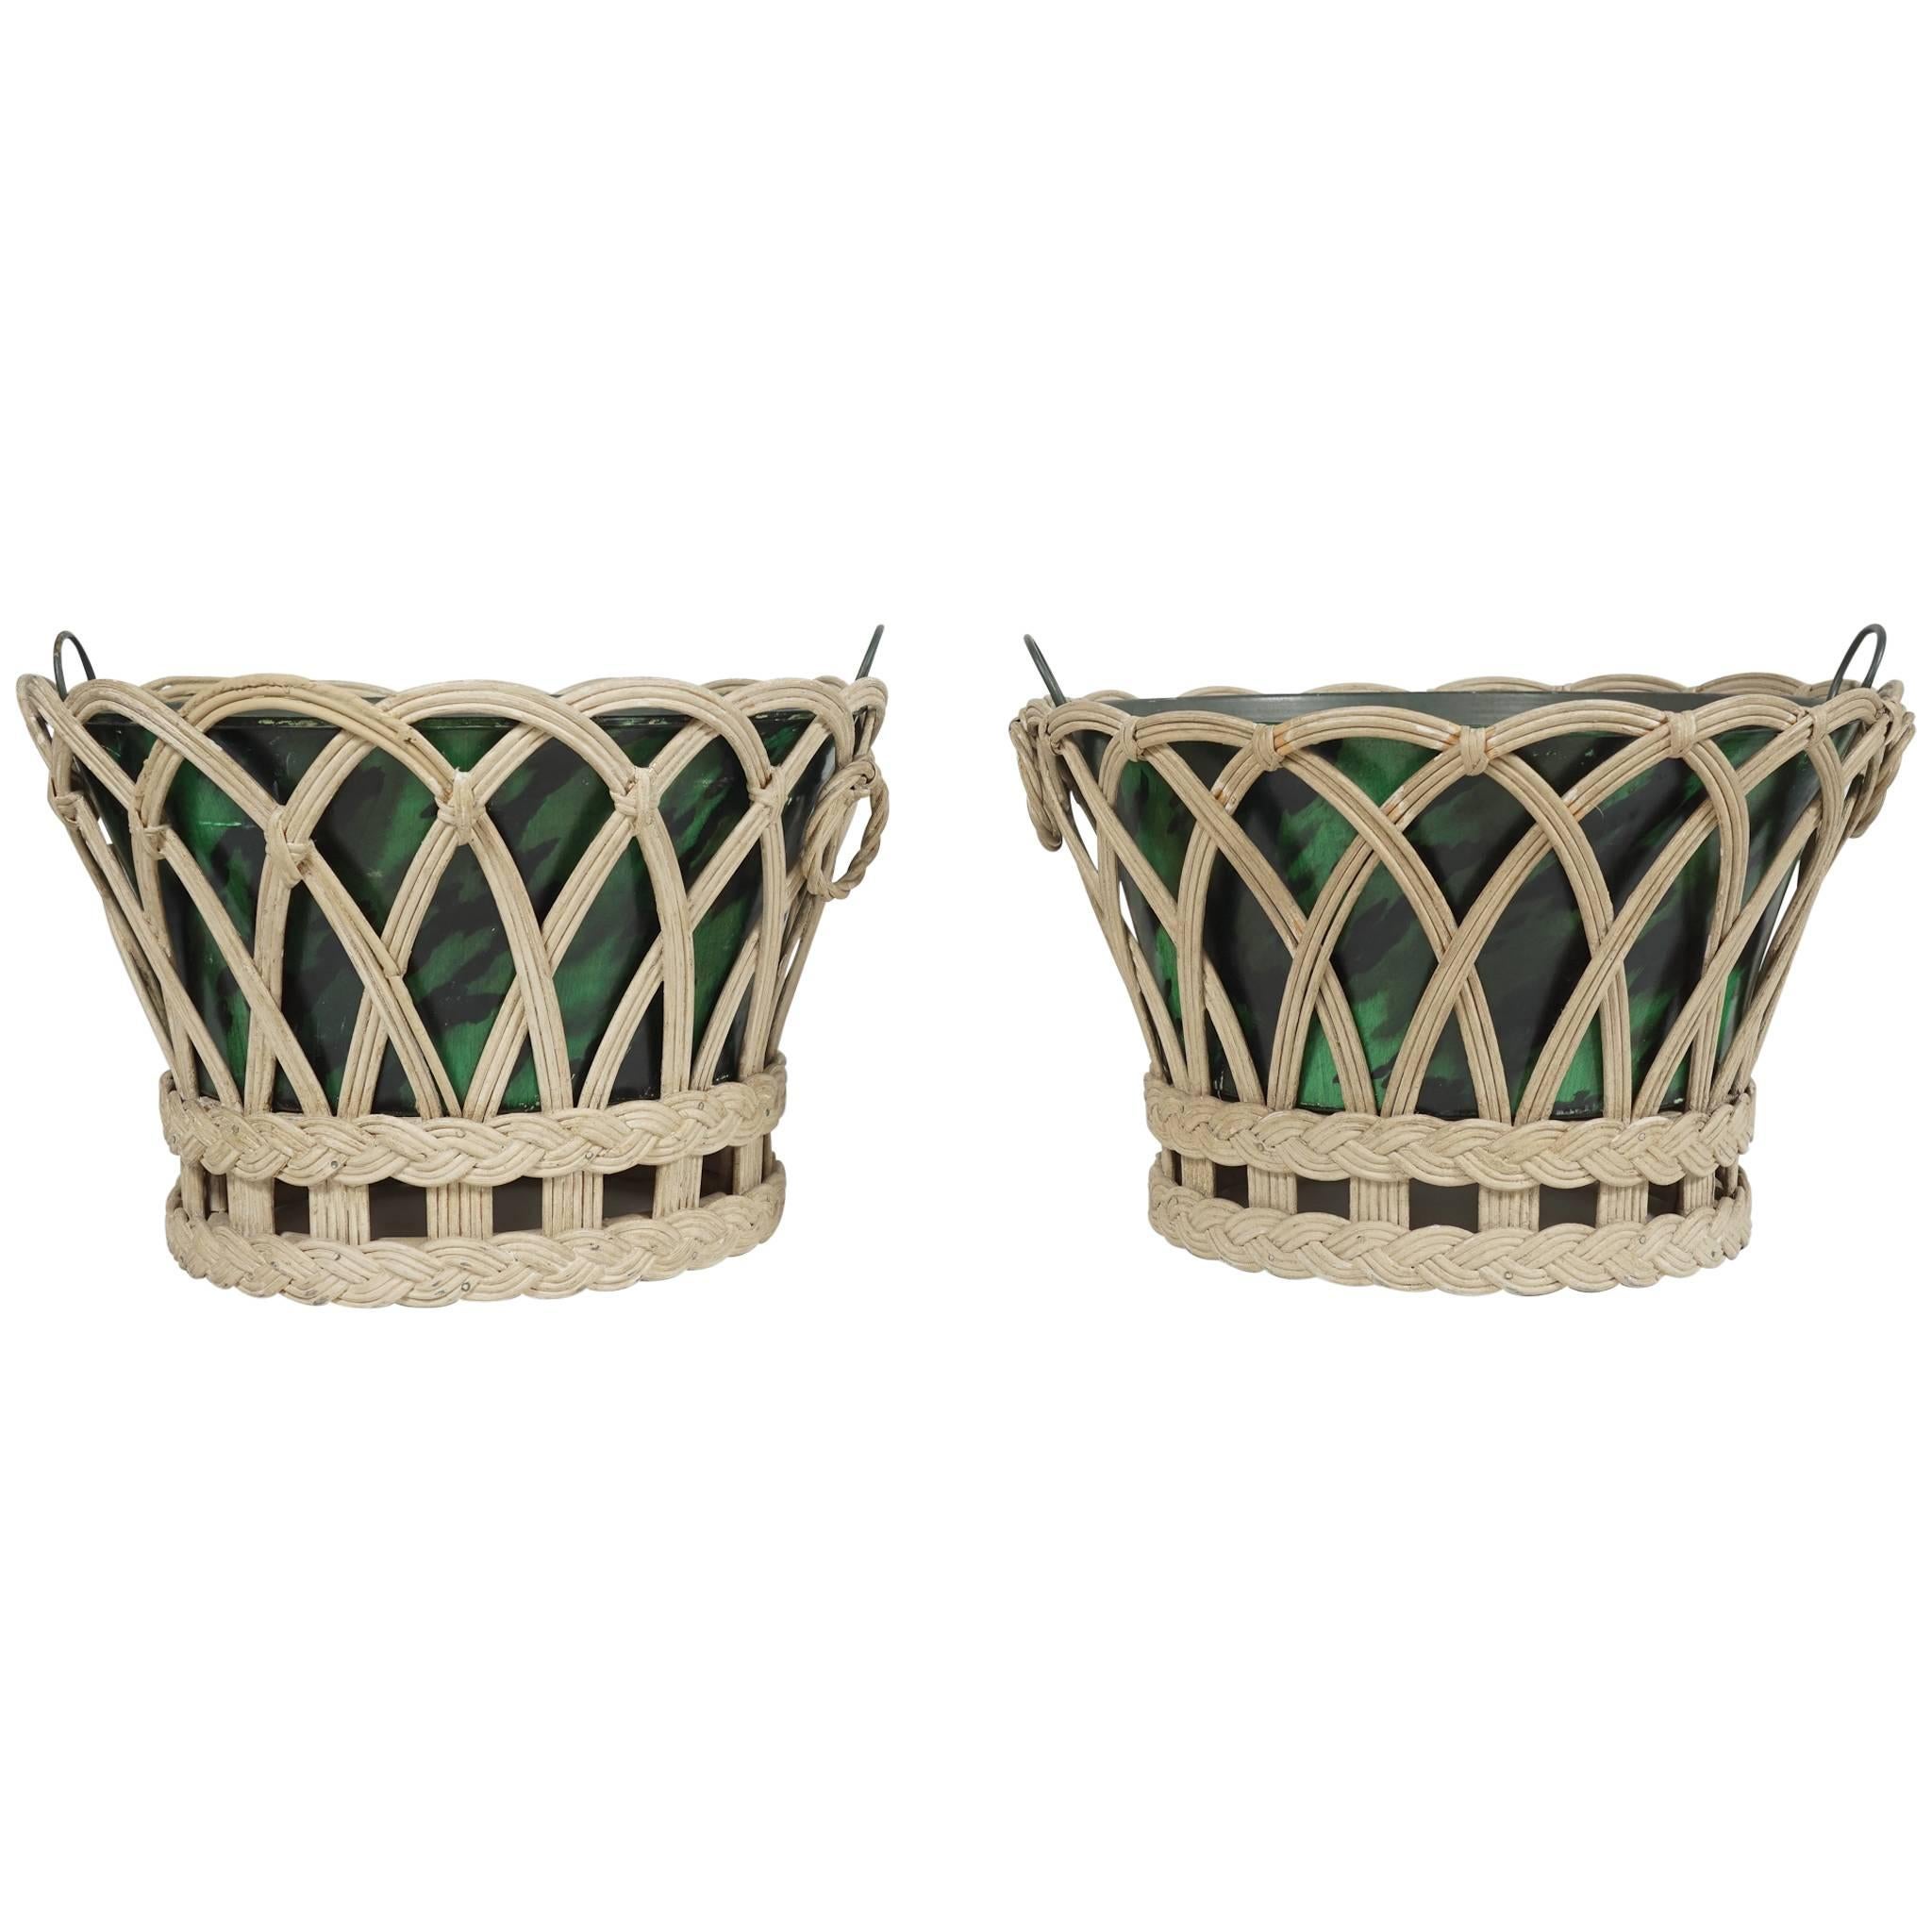 Pair of Vintage Wicker and Tole Planters from Estate of Paul & Bunny Mellon  